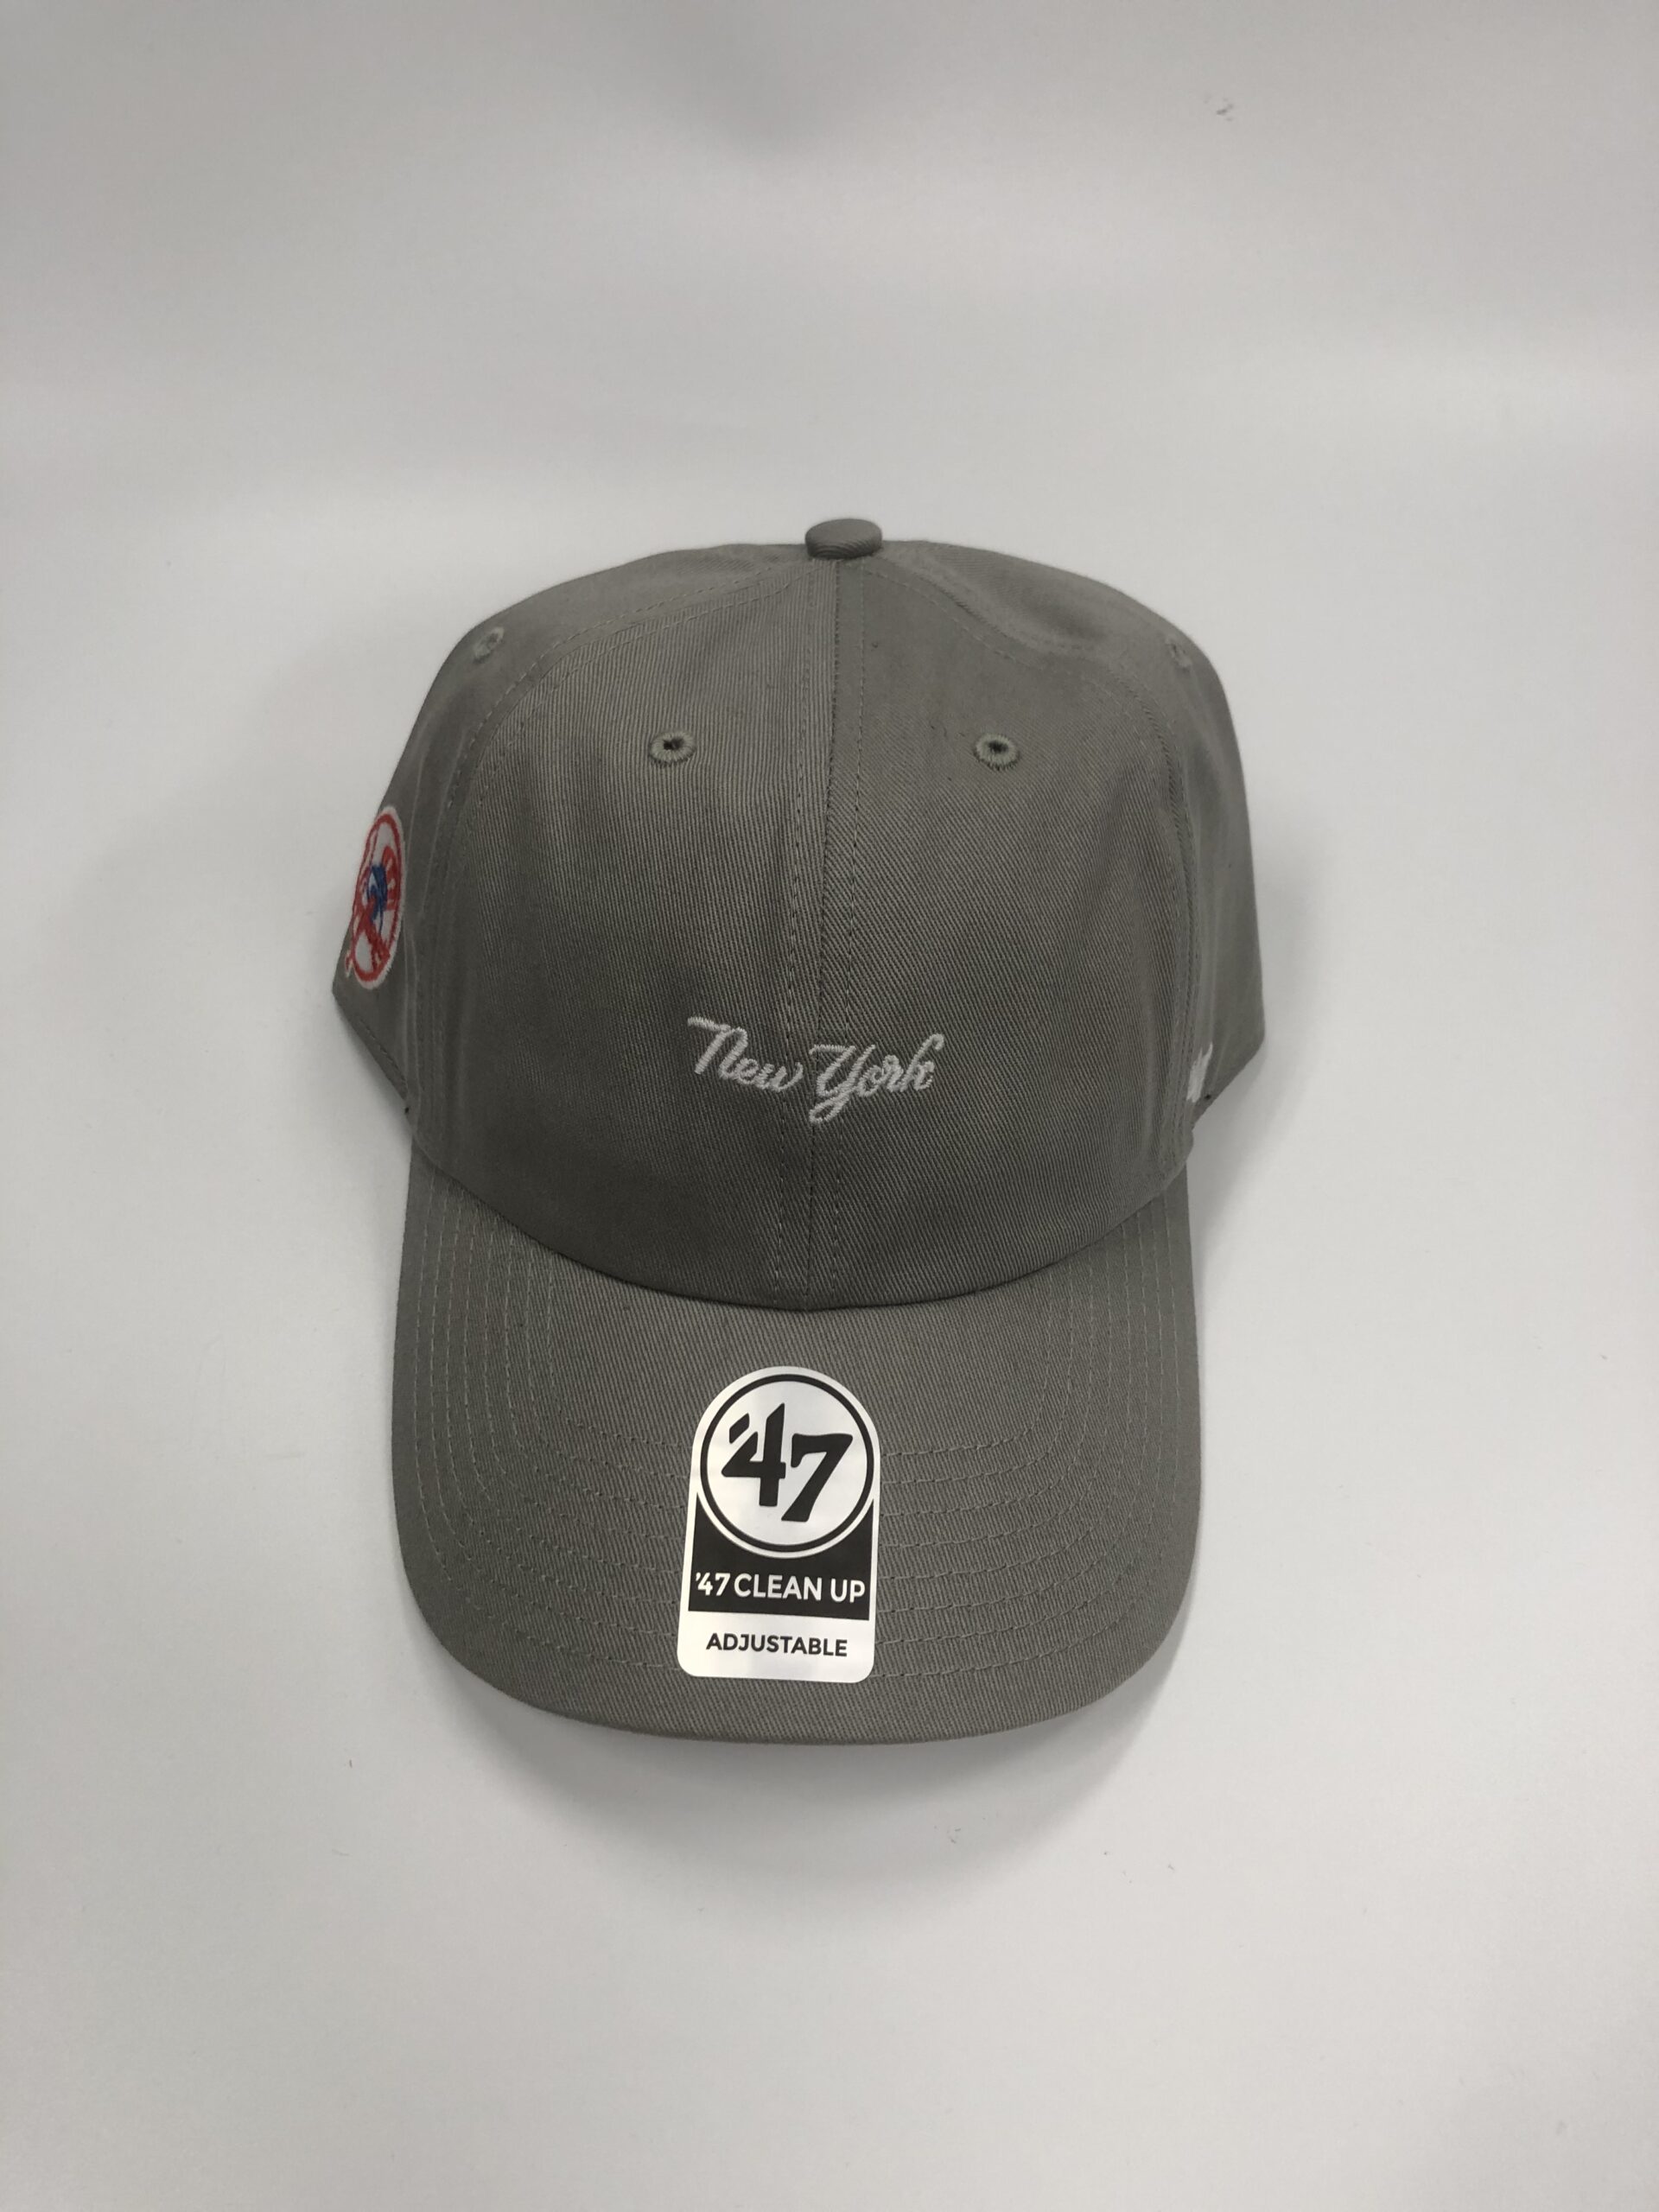 FEW Yankees Forest Unit’47 CLEAN UP Gray